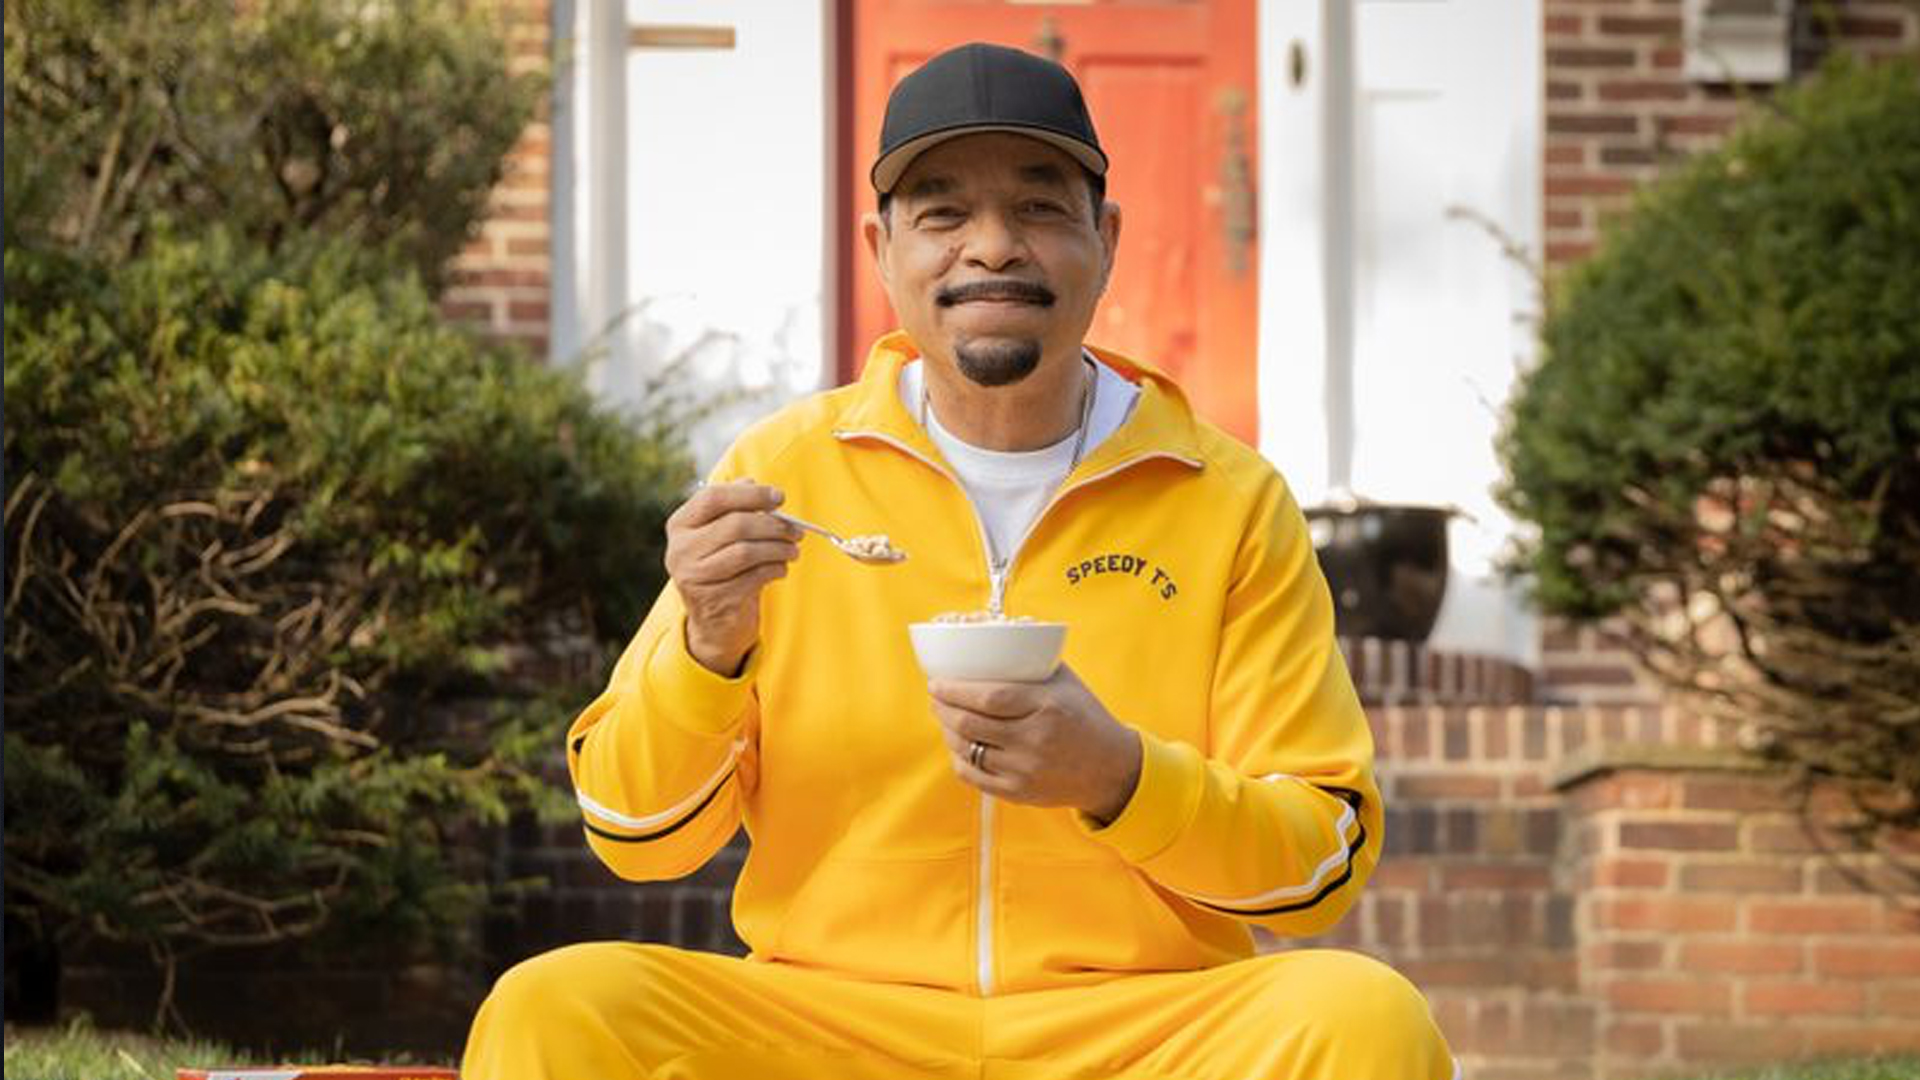 Ice-T Becomes The New Face Of Cheerios To Promote Health And Wellness